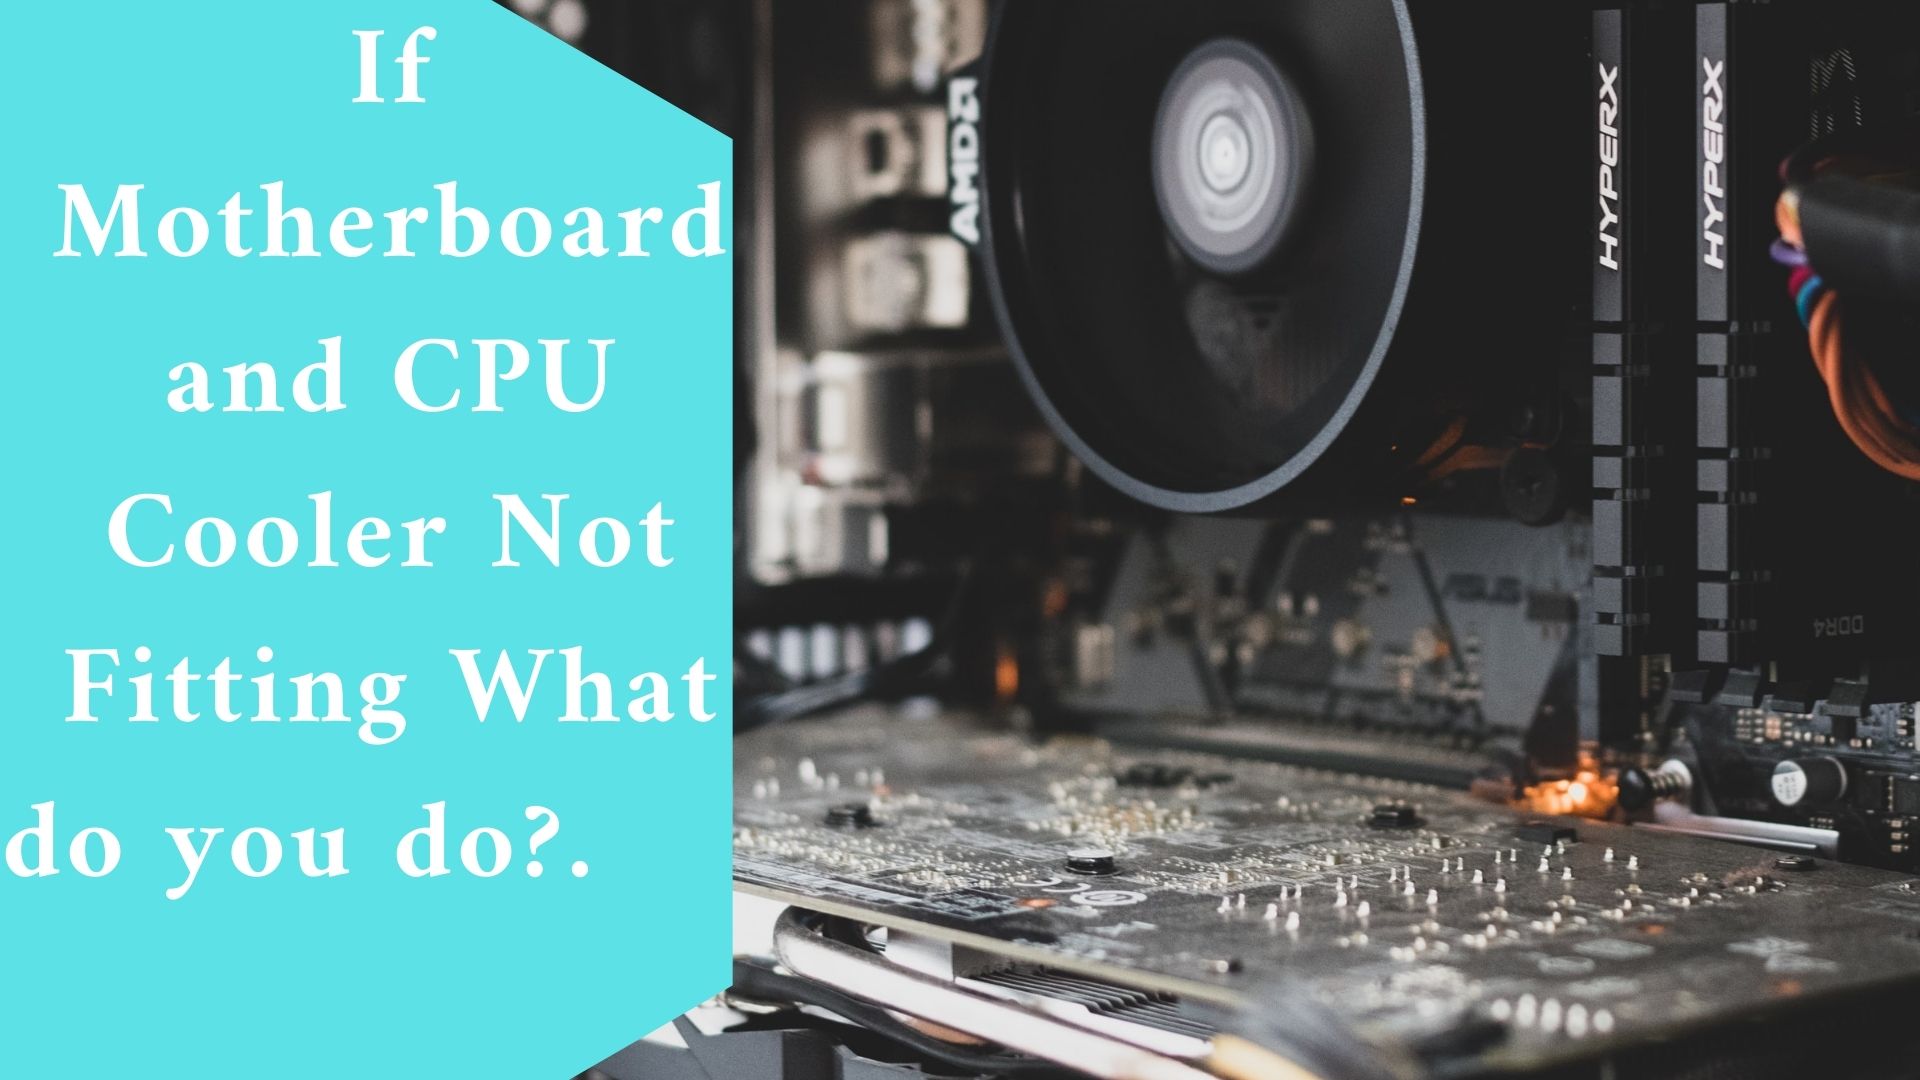 If Motherboard and CPU Cooler Not Fitting What do you do